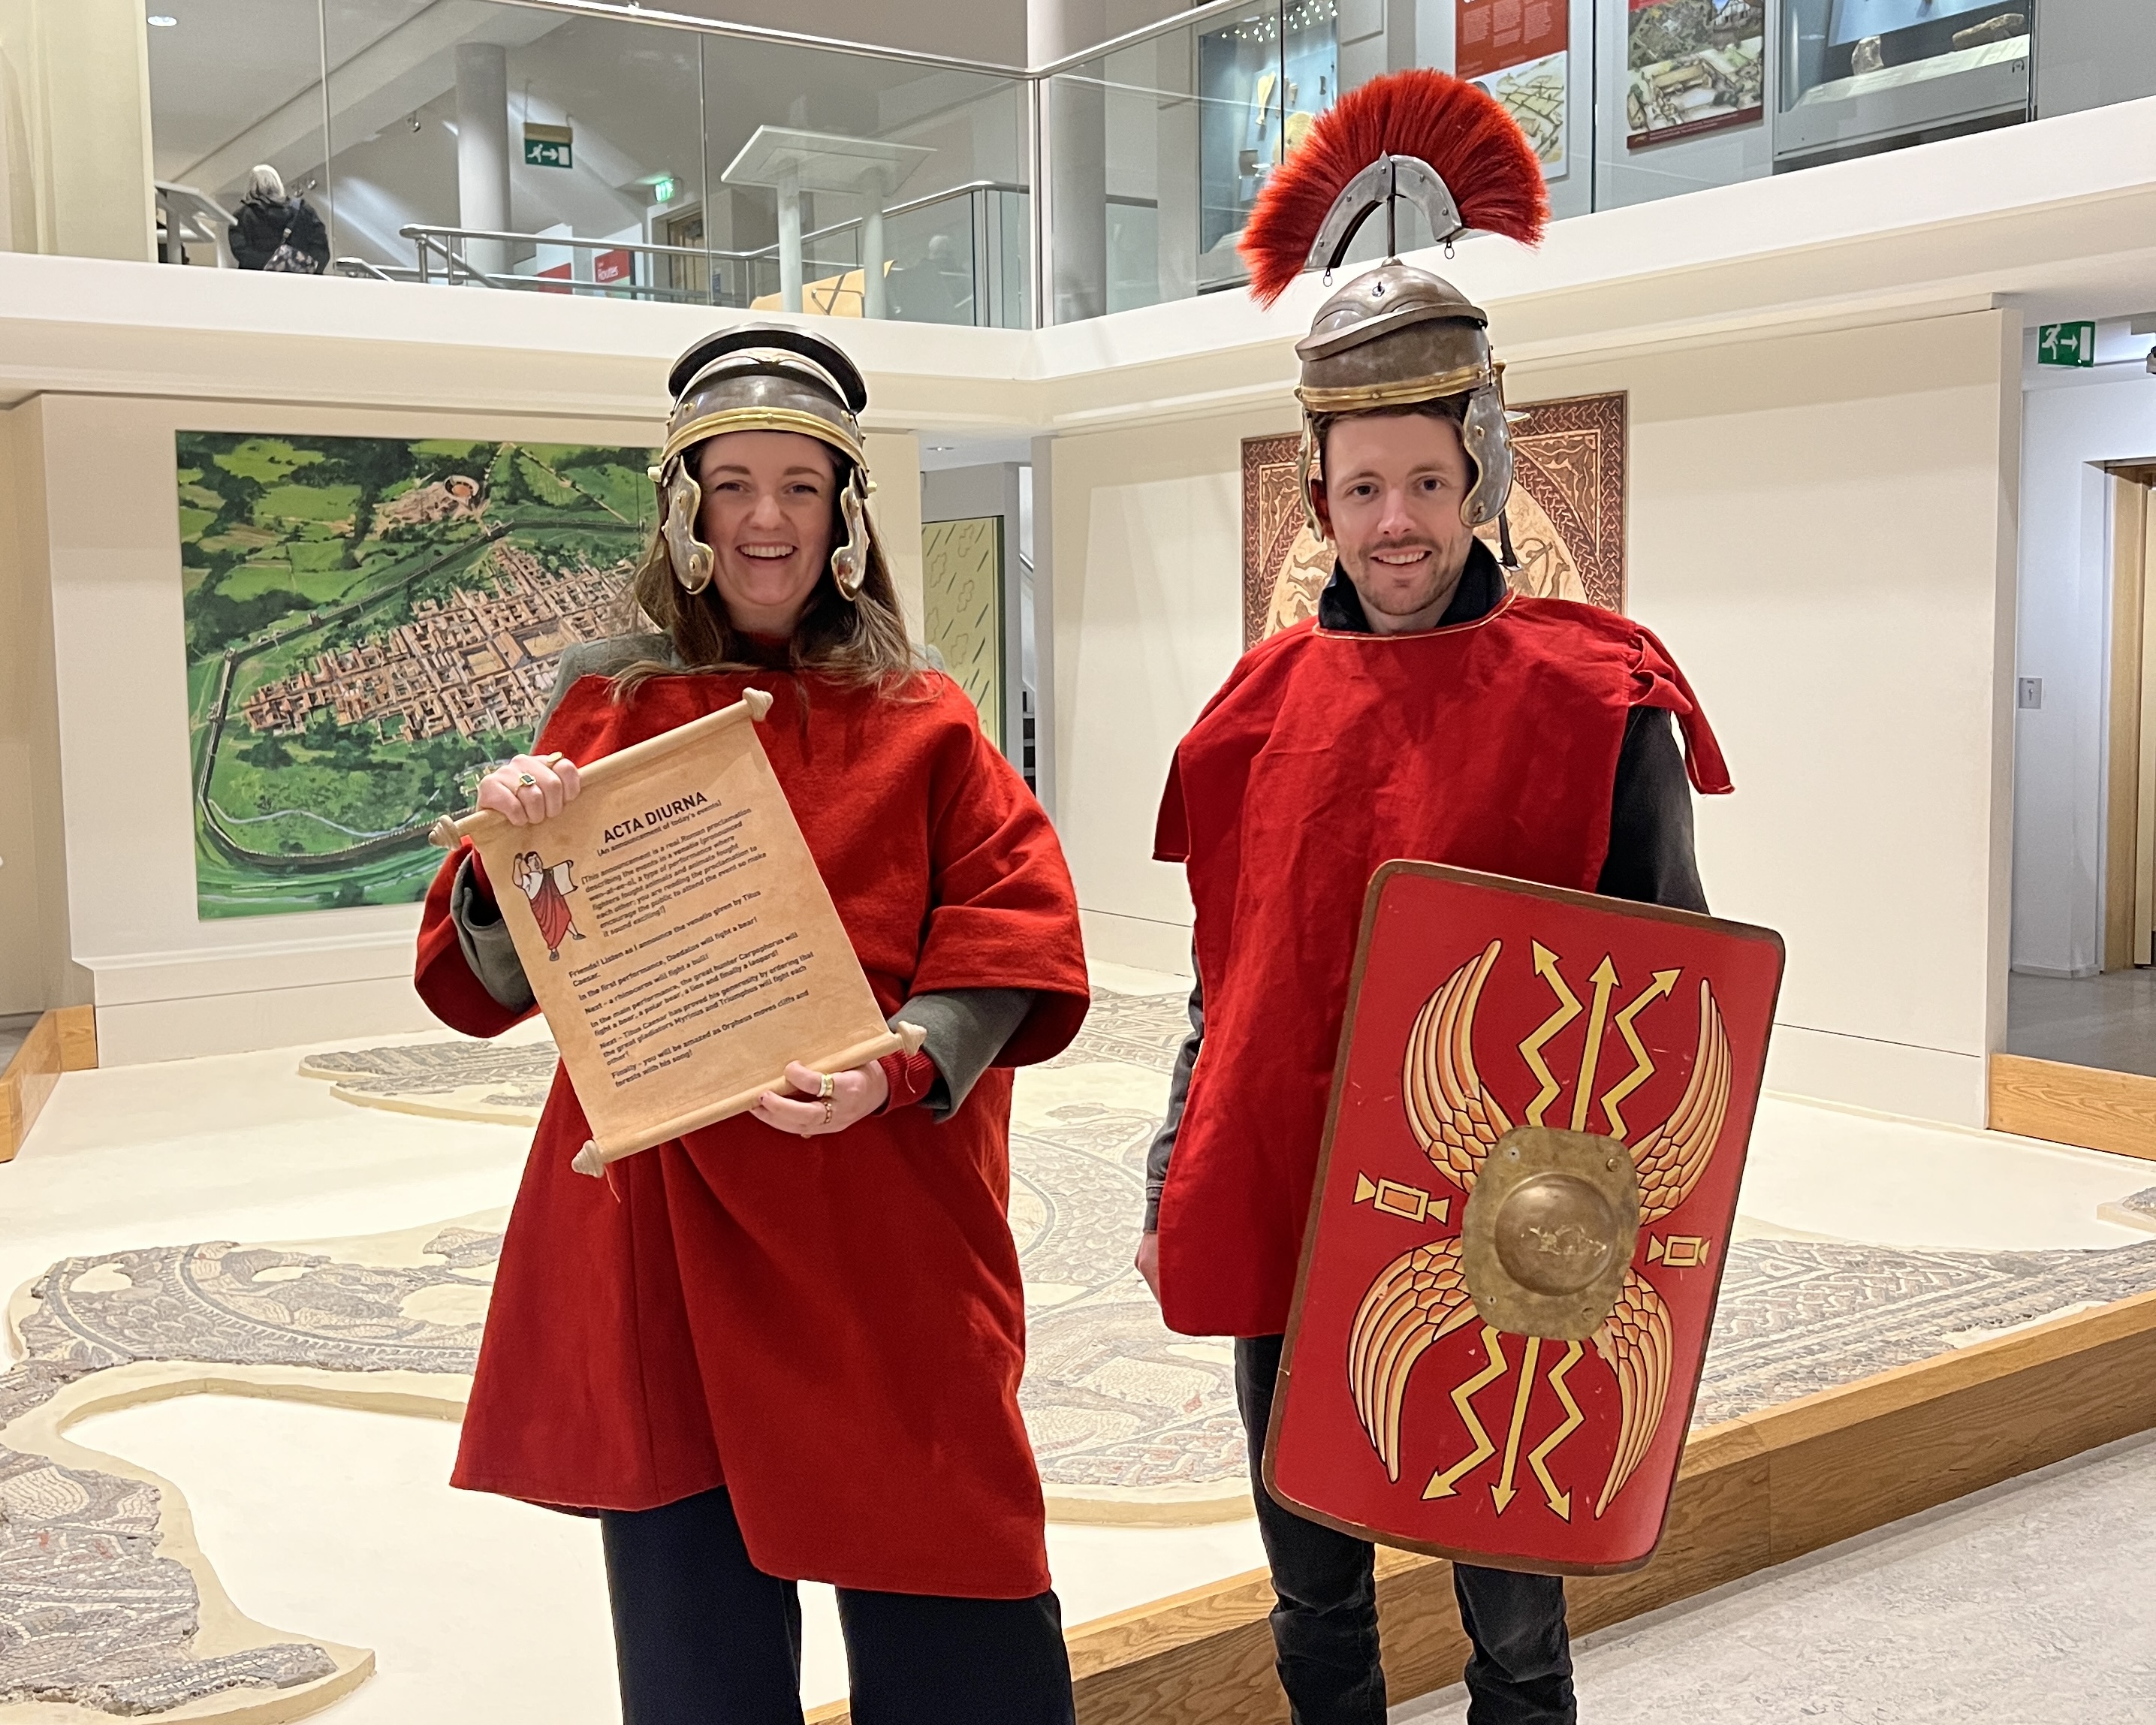 A man and woman dressed in red roman costumes pose beside an roman floor mosaic at the Corinium Museum in Circencester